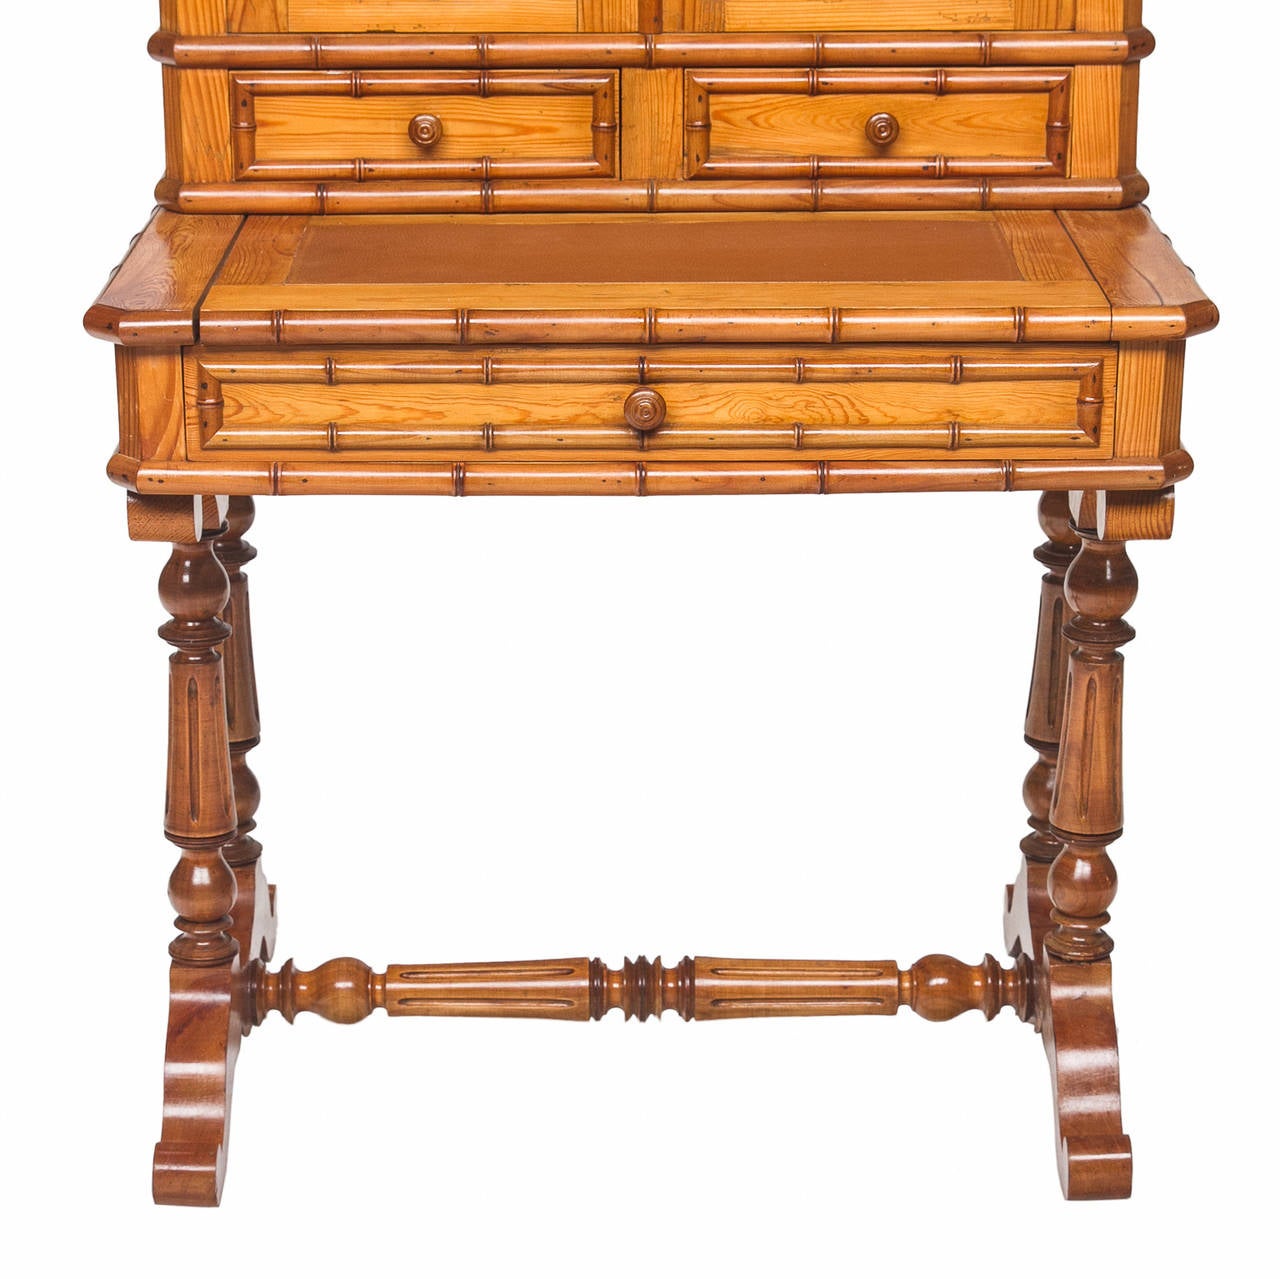 A fun!!! and unique French pine secretary with a faux bamboo look. The top cabinet opens to reveal adjustable shelves and has two doors. Above the doors there is a crown with turned urns used to create a pierce look for the gallery crown. Below the